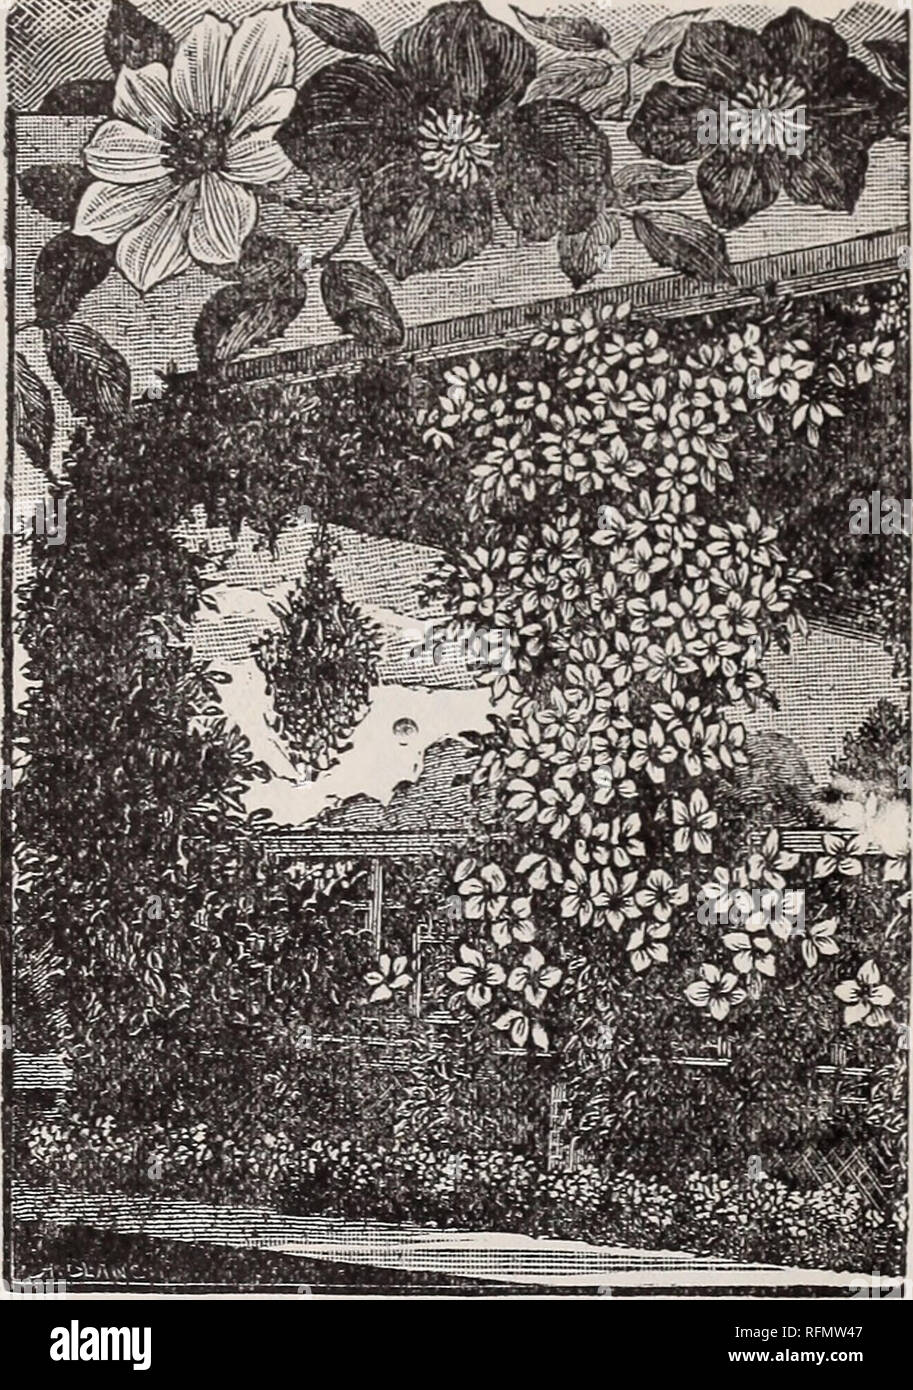 . Bulbs for fall, 1899. Nursery stock New York (State) Catalogs; Flowers Seeds Catalogs; Bulbs (Plants) Catalogs. A BOWER OF CLEMATIS. CLEMATIS PANICULATA. (New Sweet-Scented Japan Clematis.) PANICULATA. One of the most beau- tiful of our hardy fall blooming vines. The flowers are pure white, very fragrant, borne in large clusters fairly covering the plant, go that it is a mass of fleecy white. I5c, 2 for 25c. COCCI NEA. Bright vermilion scarlet. 15c. each; 2 for 25c. CRISPA. Flowers bell-shaped, purplish blue, very fragrant. 15c, each; 2 for 25c. GRAVEOLENS. A yellow - flowered variety, very  Stock Photo